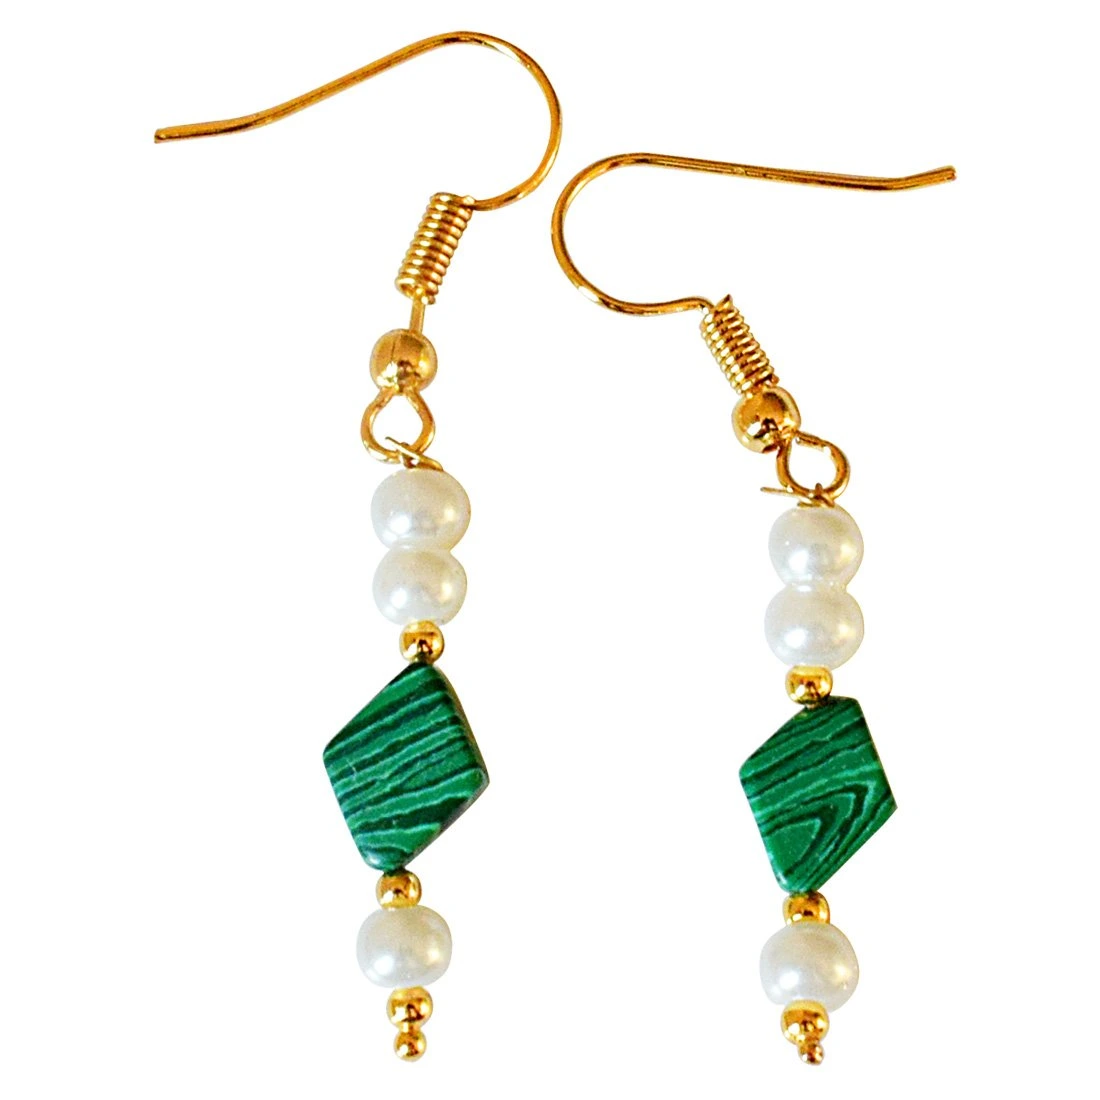 Kite Shaped Malachite and Shell Pearl Hanging Earrings (SE326)